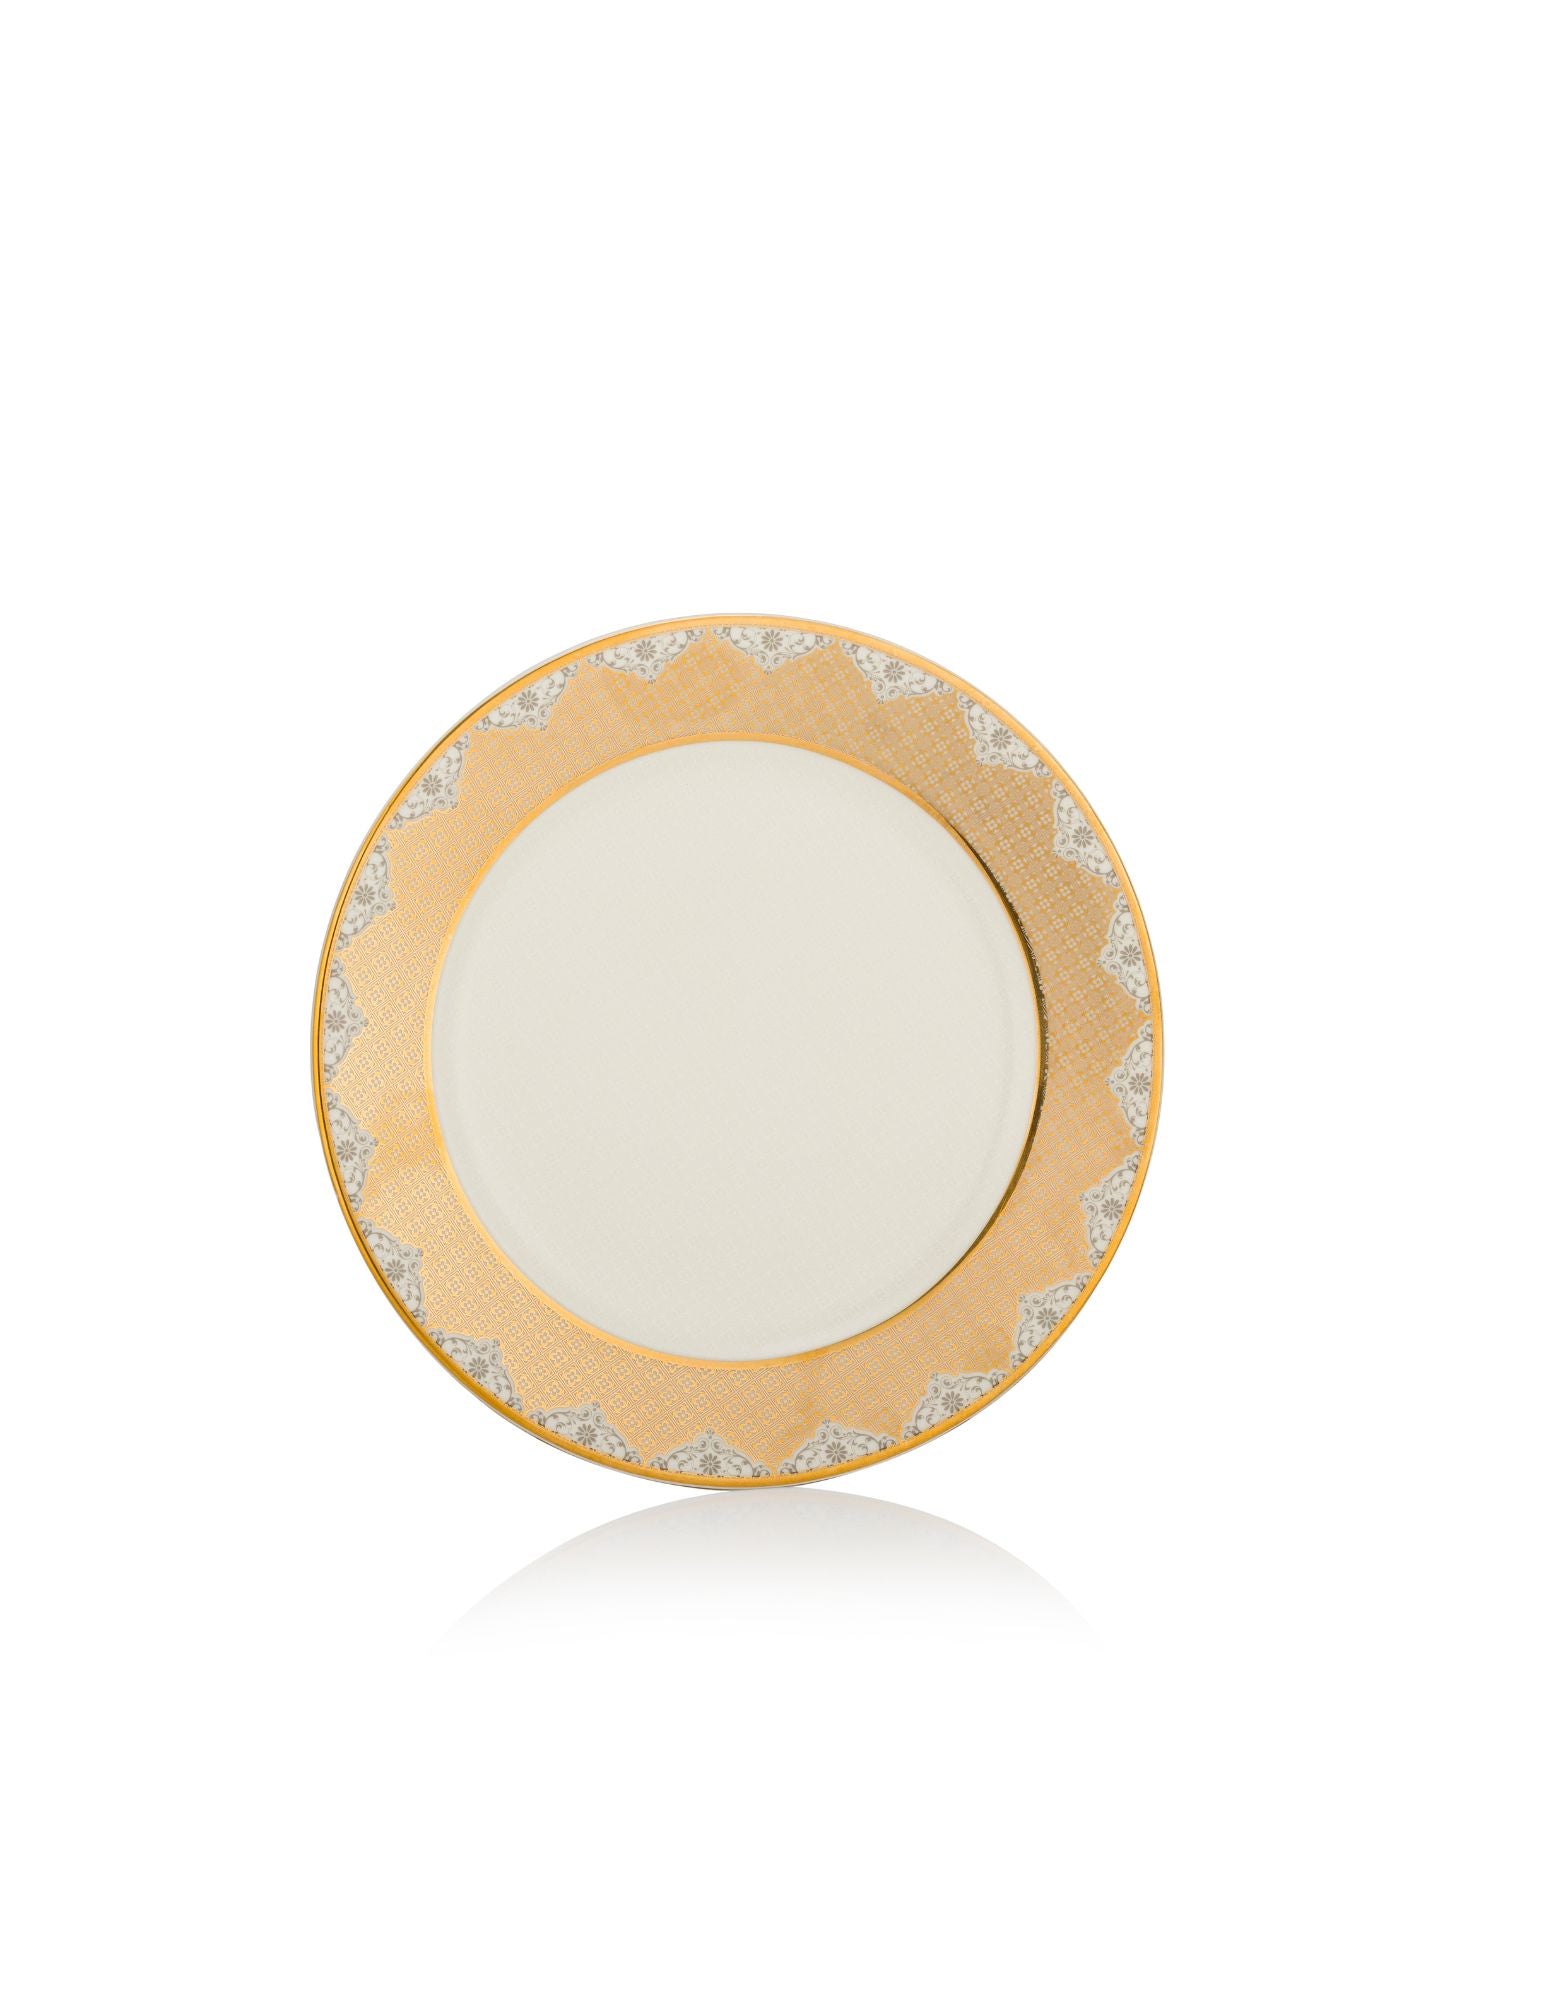 Mirror collection - side plate